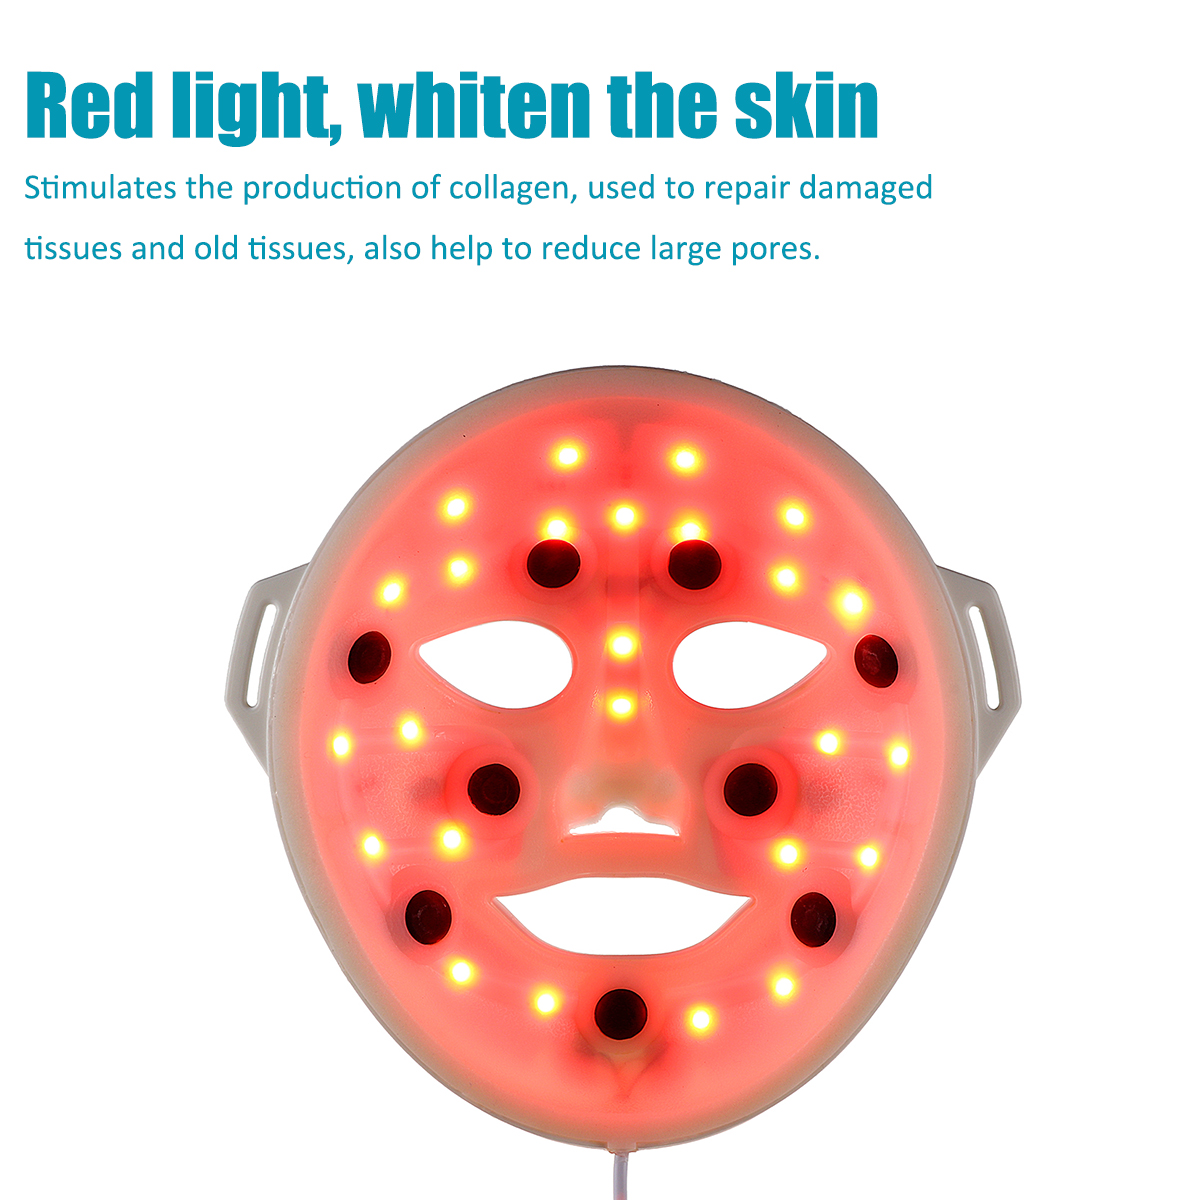 LED-Photon-Therapy-Facial-Mask-3-Colors-Vibration-Skin-Massager-Beauty-Face-Tool-1940393-5